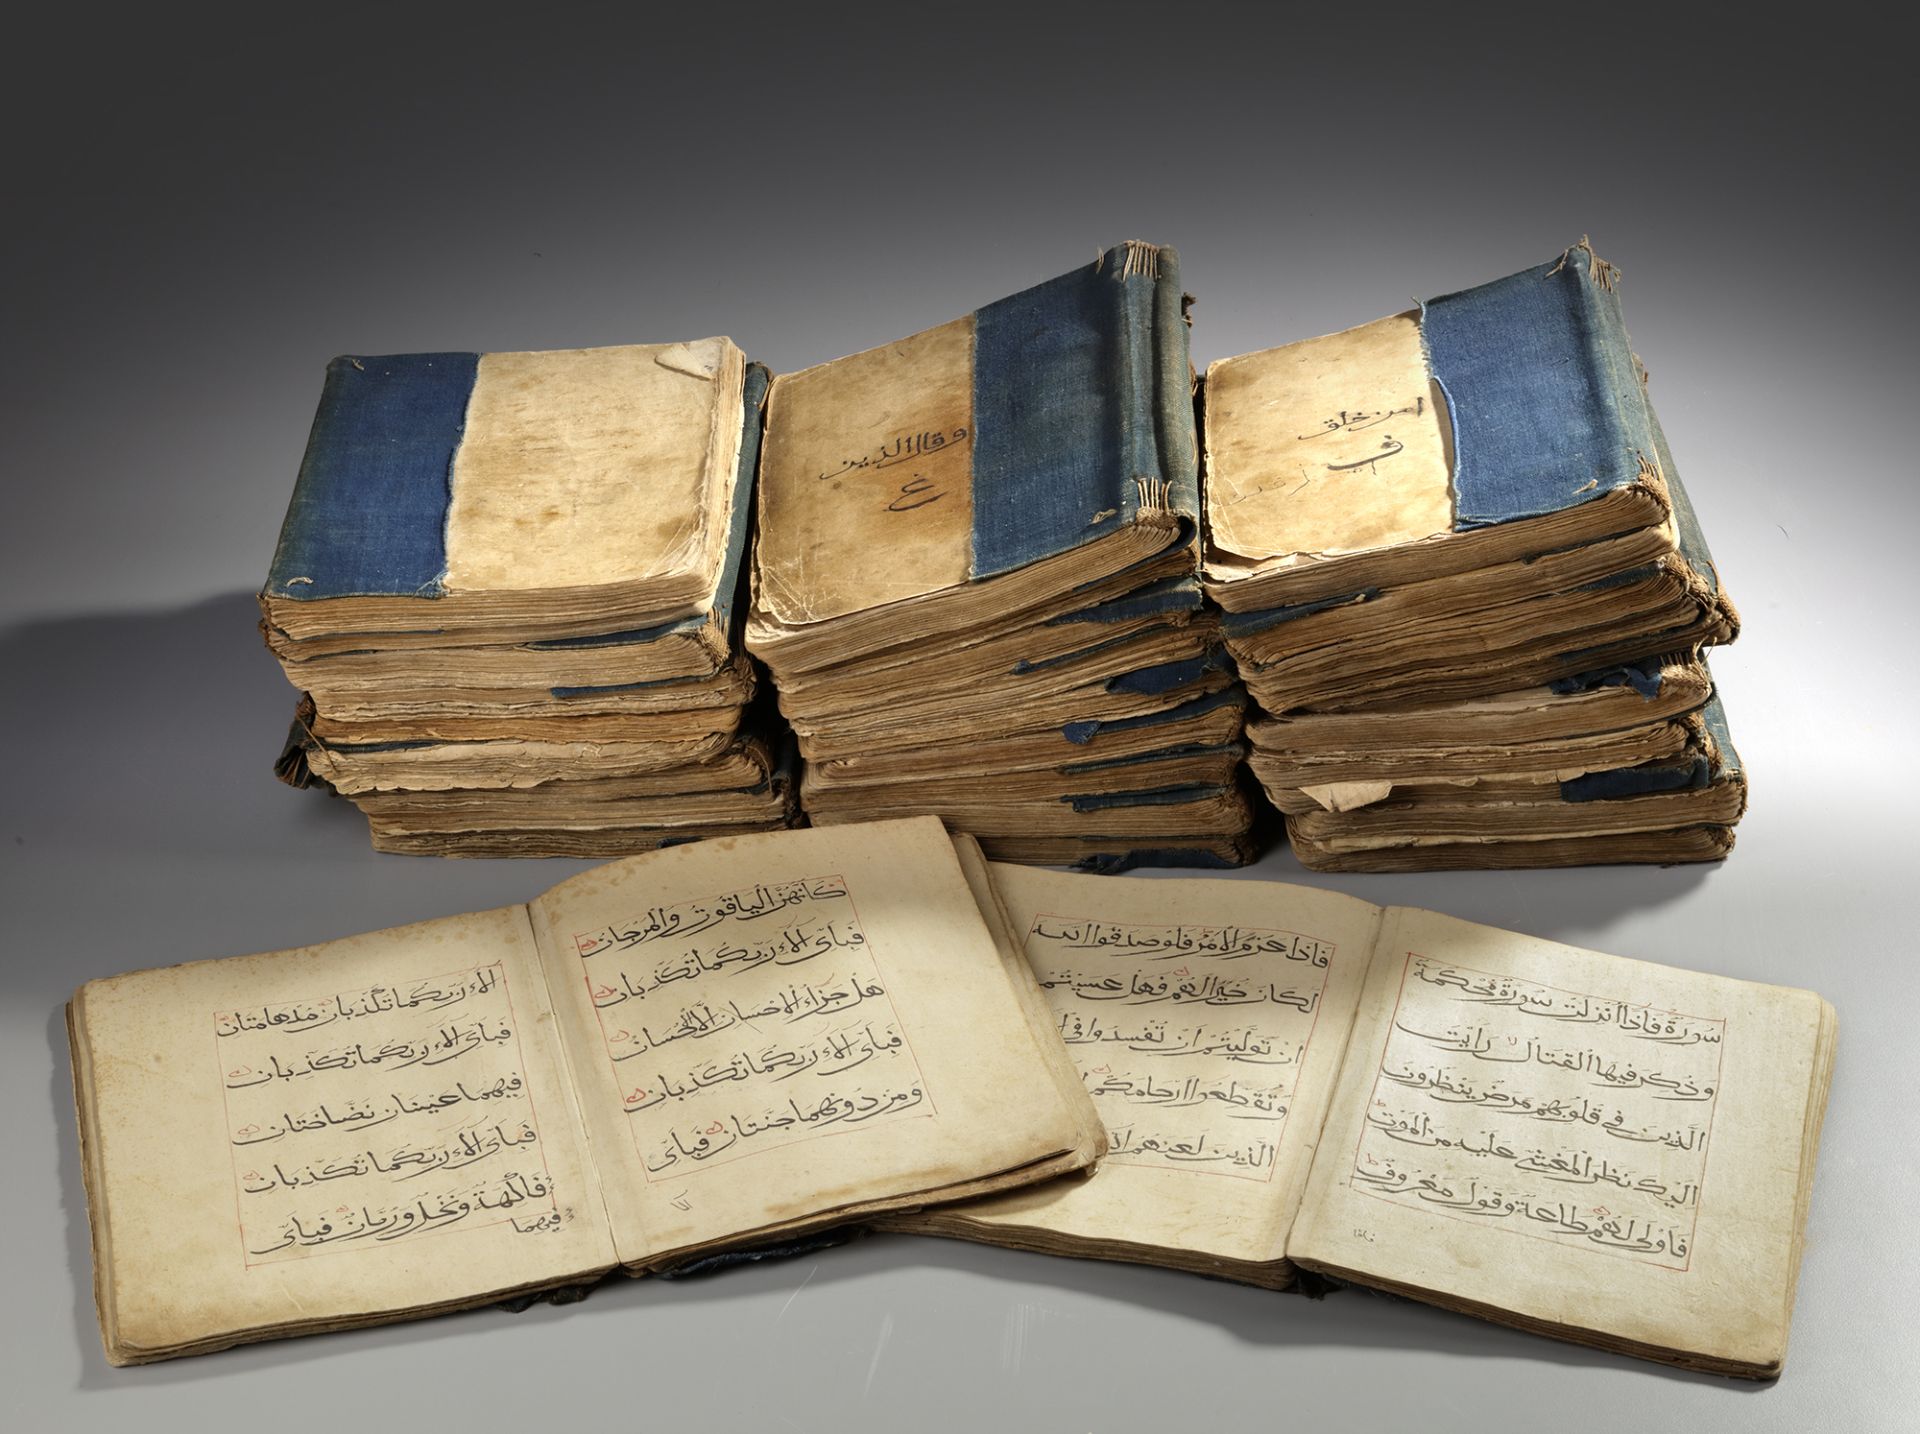 A COMPLETE QURAN IN 30 VOLUMES, CHINA, YUNNAN, 17TH CENTURY - Image 4 of 5